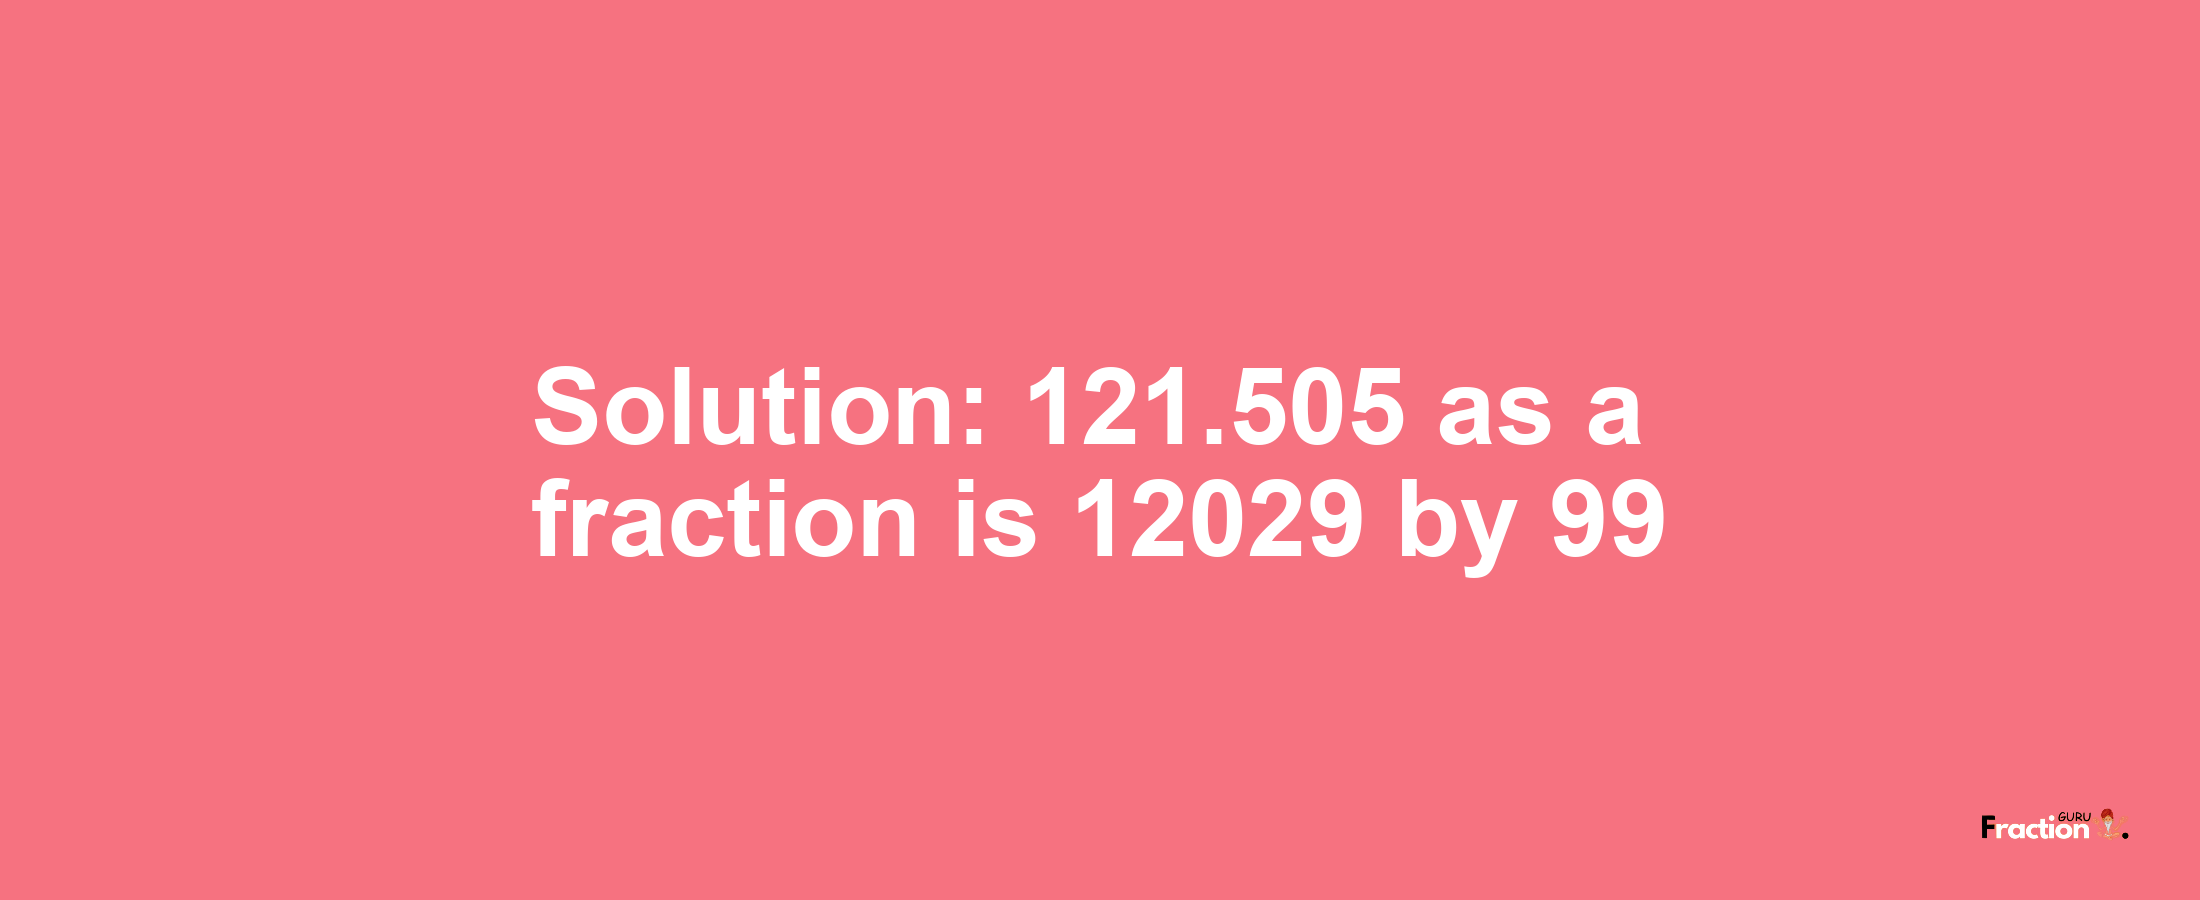 Solution:121.505 as a fraction is 12029/99